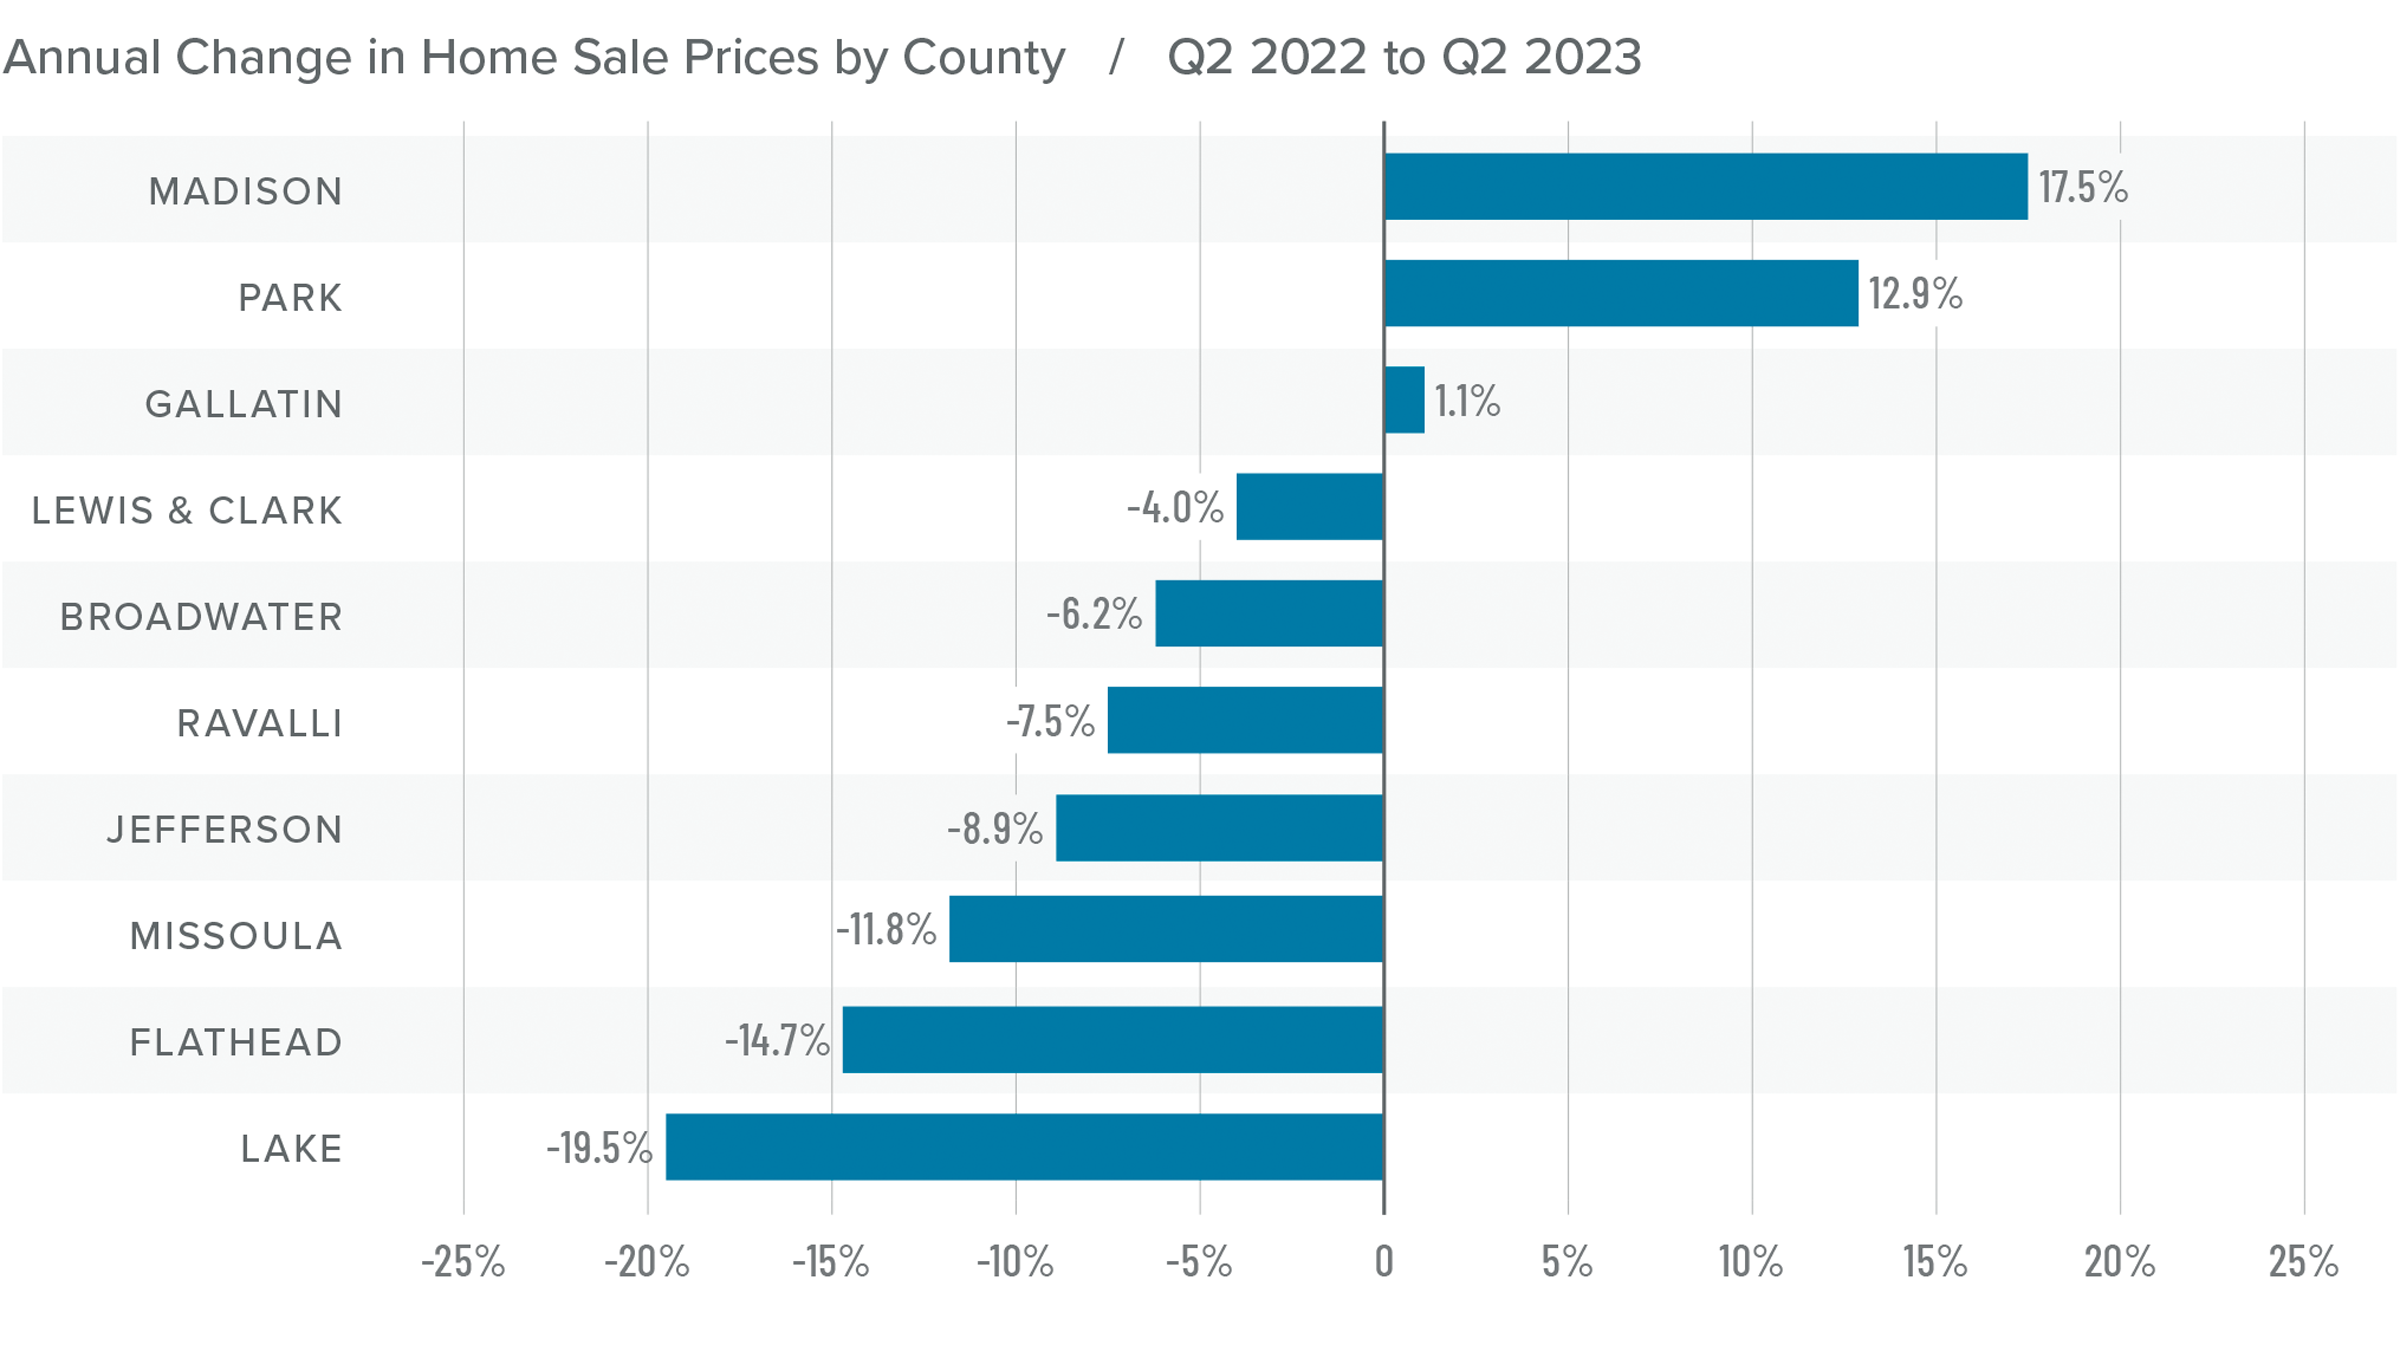 A bar graph showing the annual change in home sale prices by county in Montana from Q2 2022 to Q2 2023. Madison County tops the list at 17.5%, while Lake County had the greatest decline at -19.5%. Ravalli and Jefferson Counties were toward the middle at around -8%.